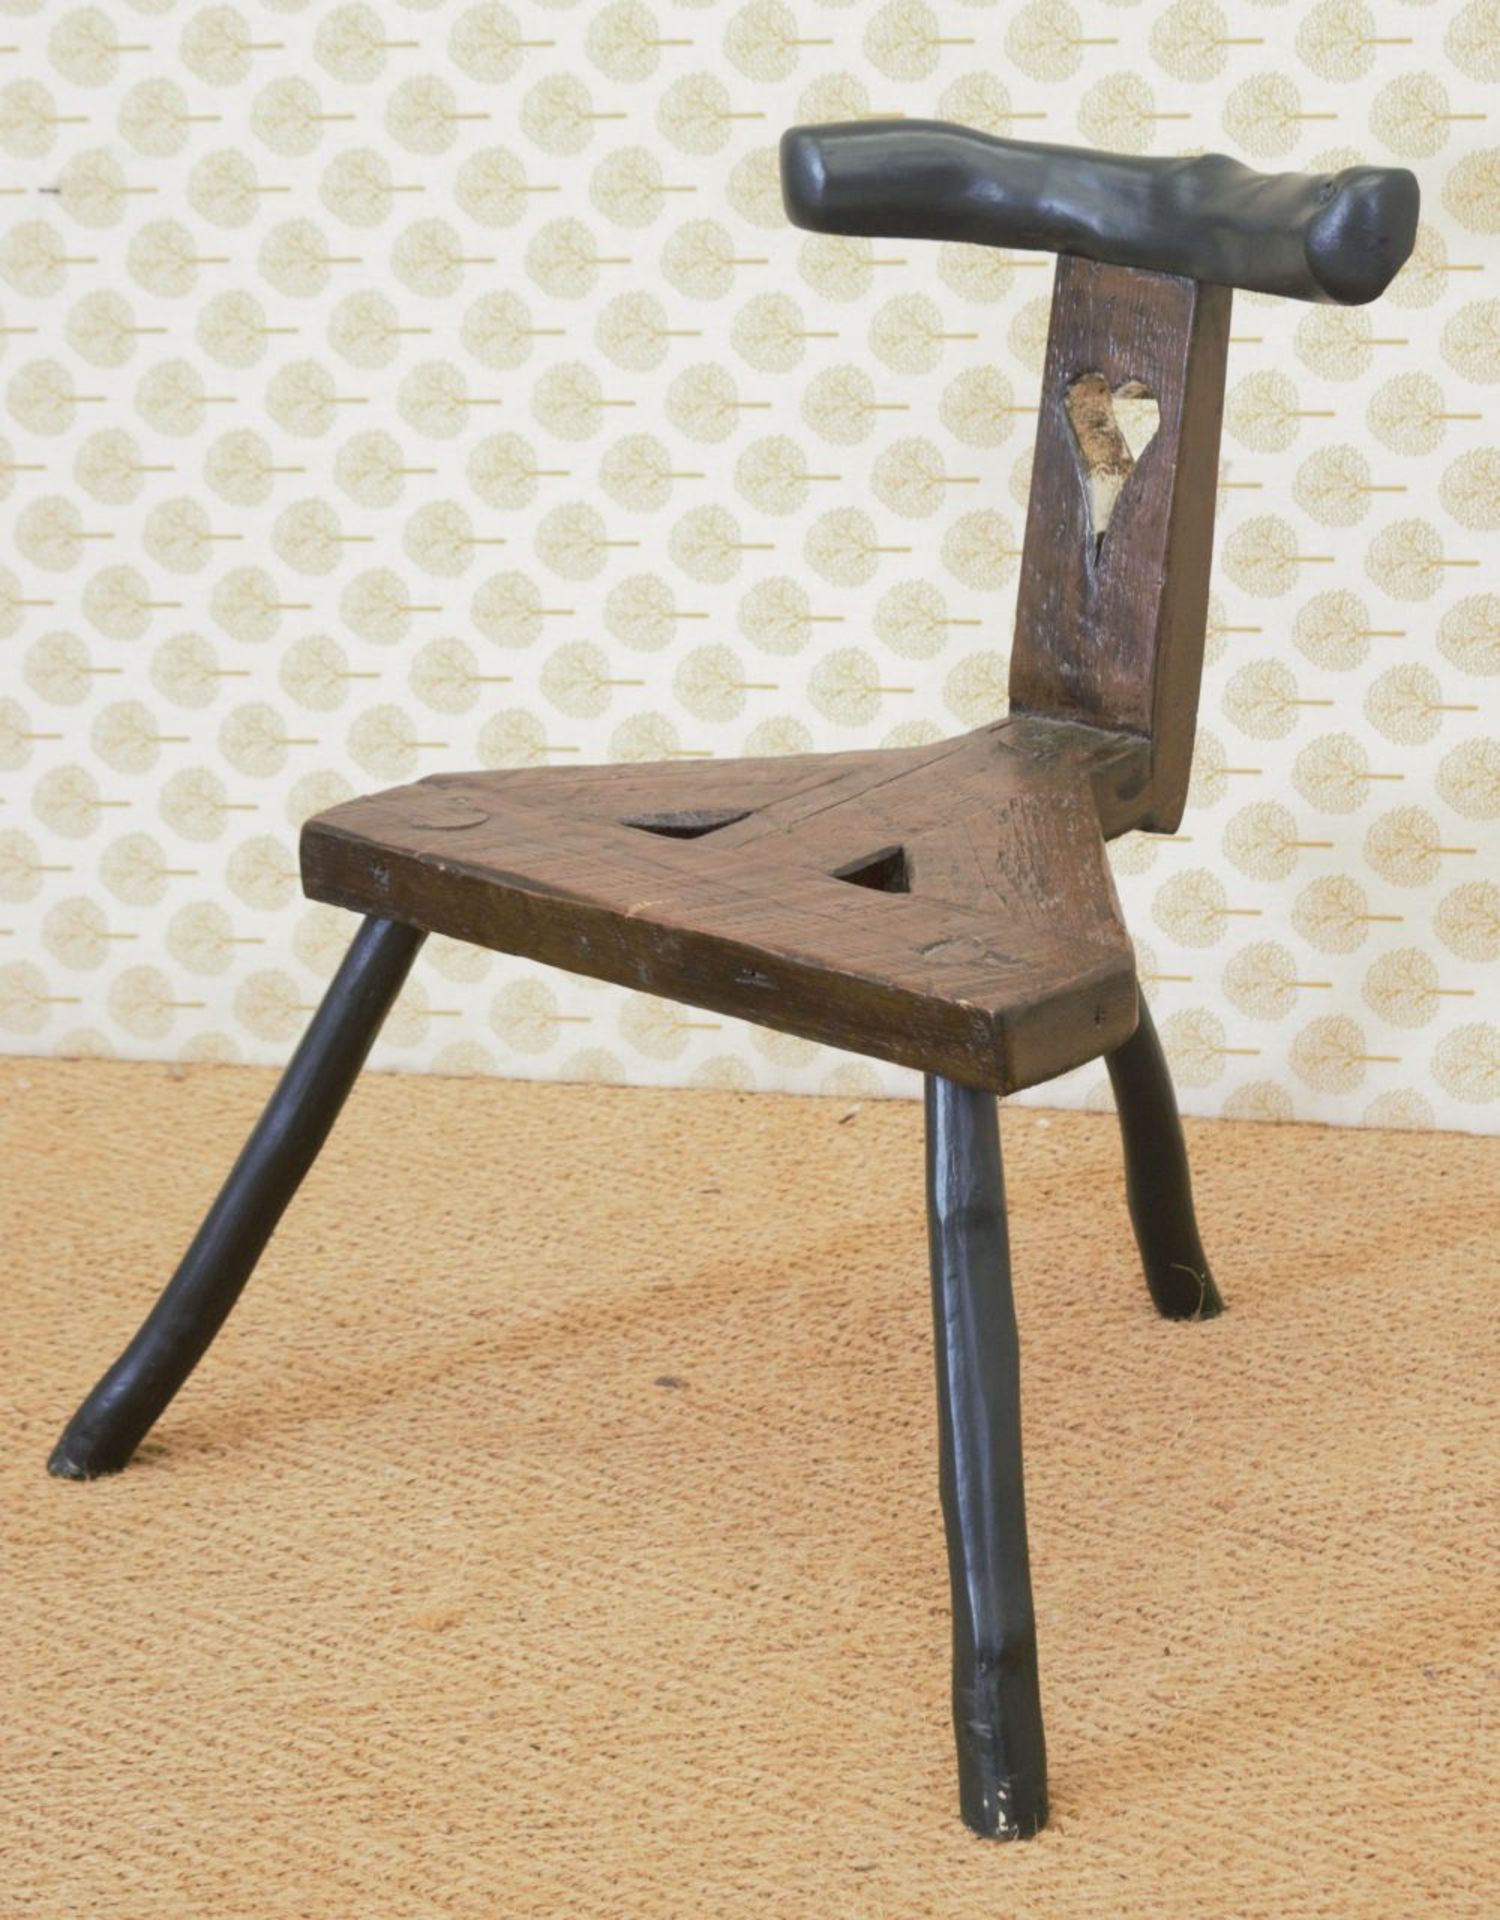 19TH-CENTURY ASH HEDGE CHAIR - Image 2 of 4